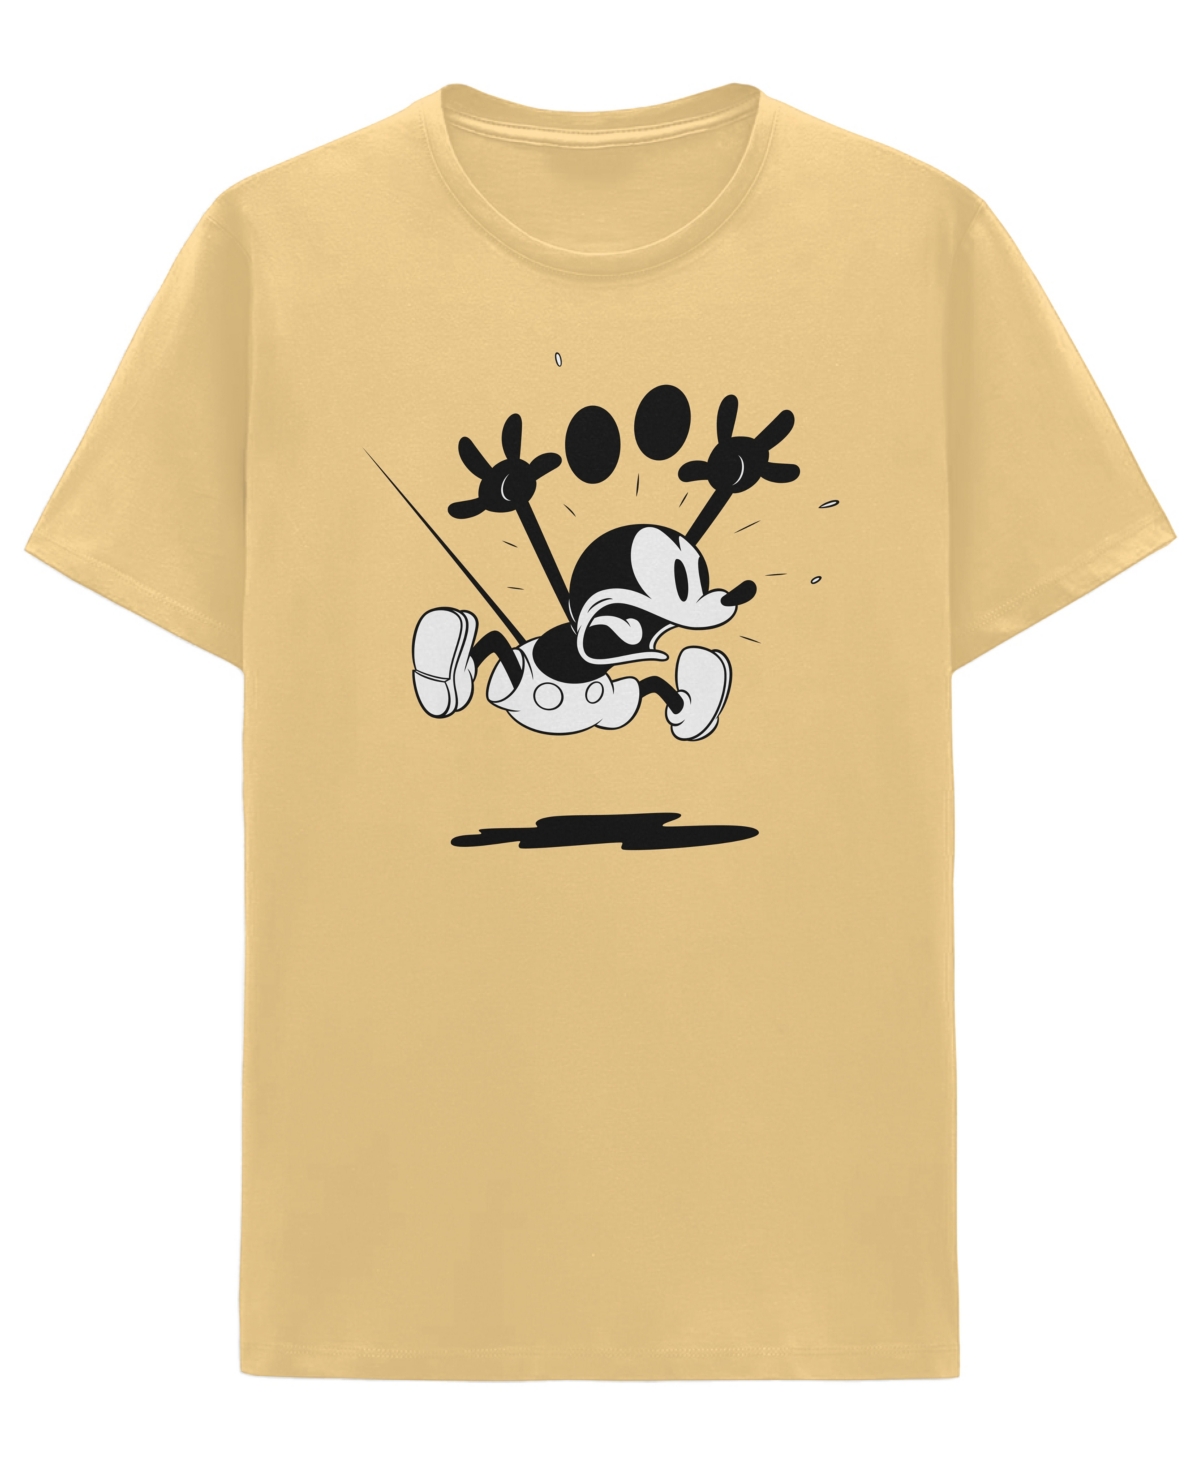 Men's Mickey Mouse Short Sleeves T-shirt - Yellow